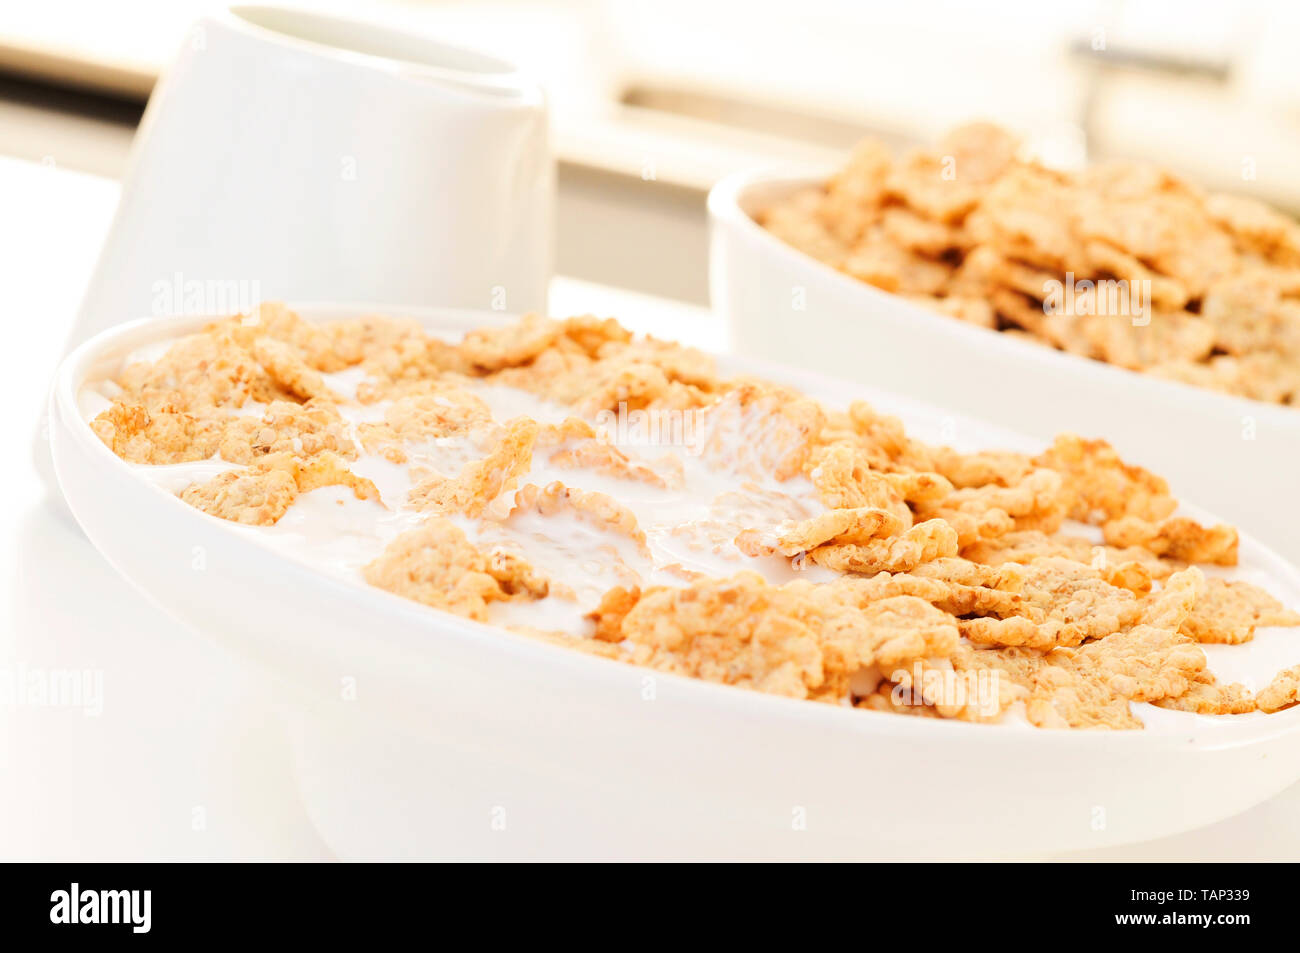 closeup of a bowl with breakfast cereals soaked in milk or drinkable yogurt, on a table set for breakfast Stock Photo